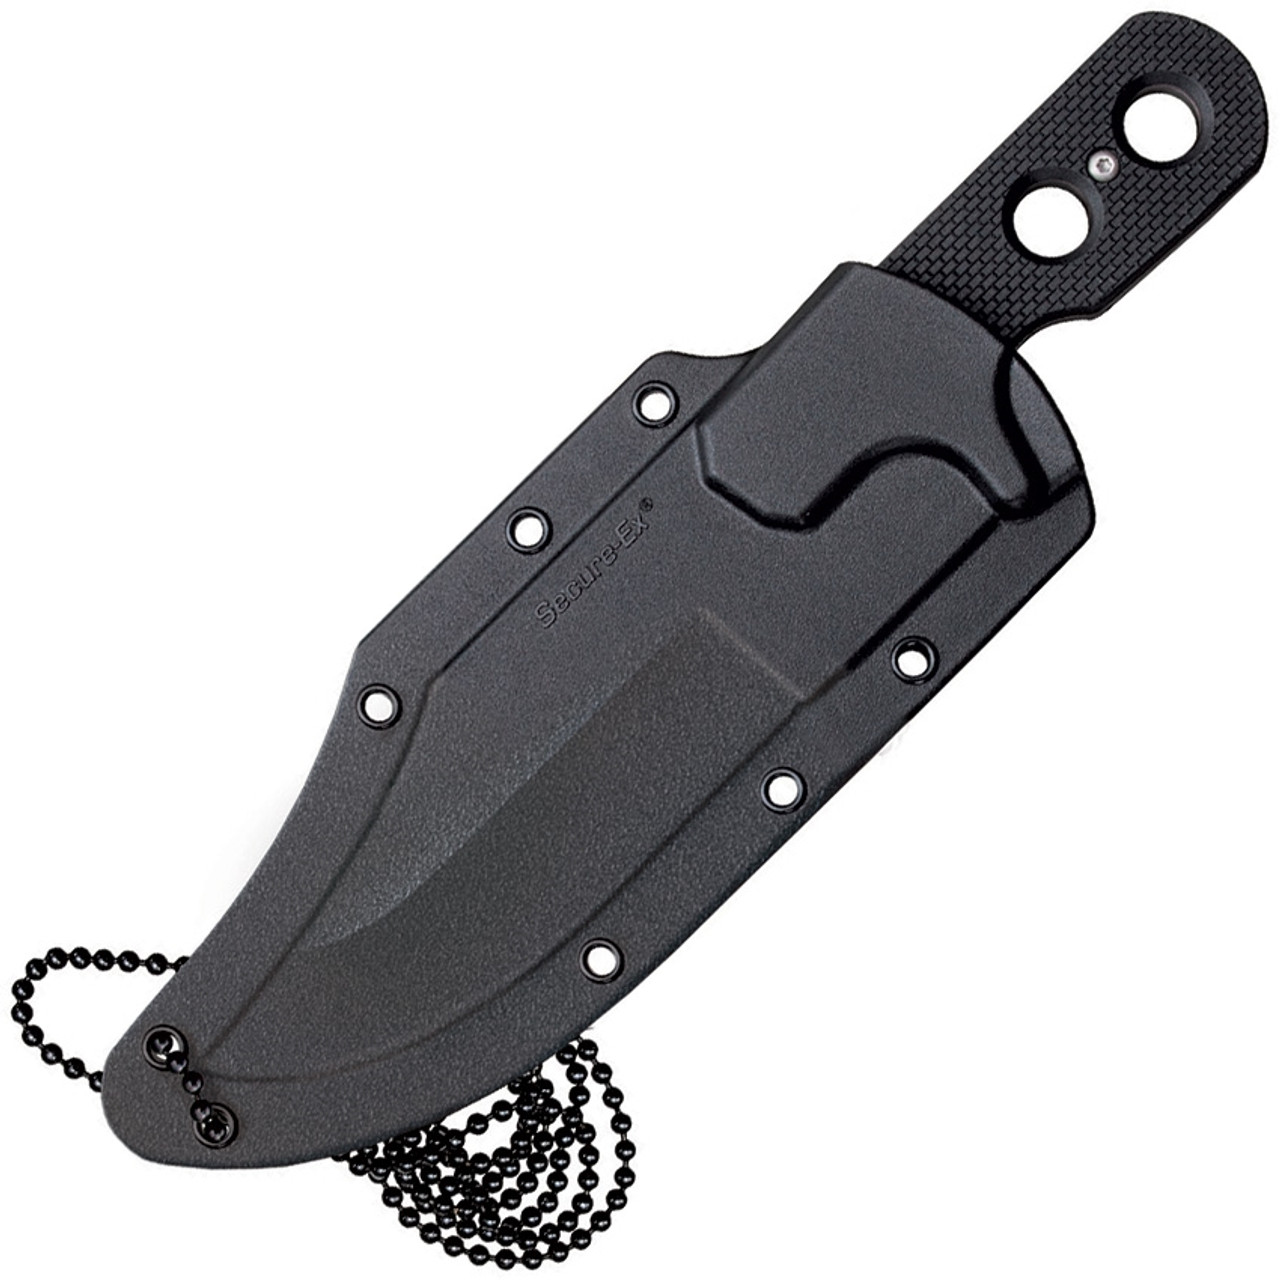 Cold Steel Mini Tac Bowie Fixed Blade Knife Black Handle Plain Blade ...